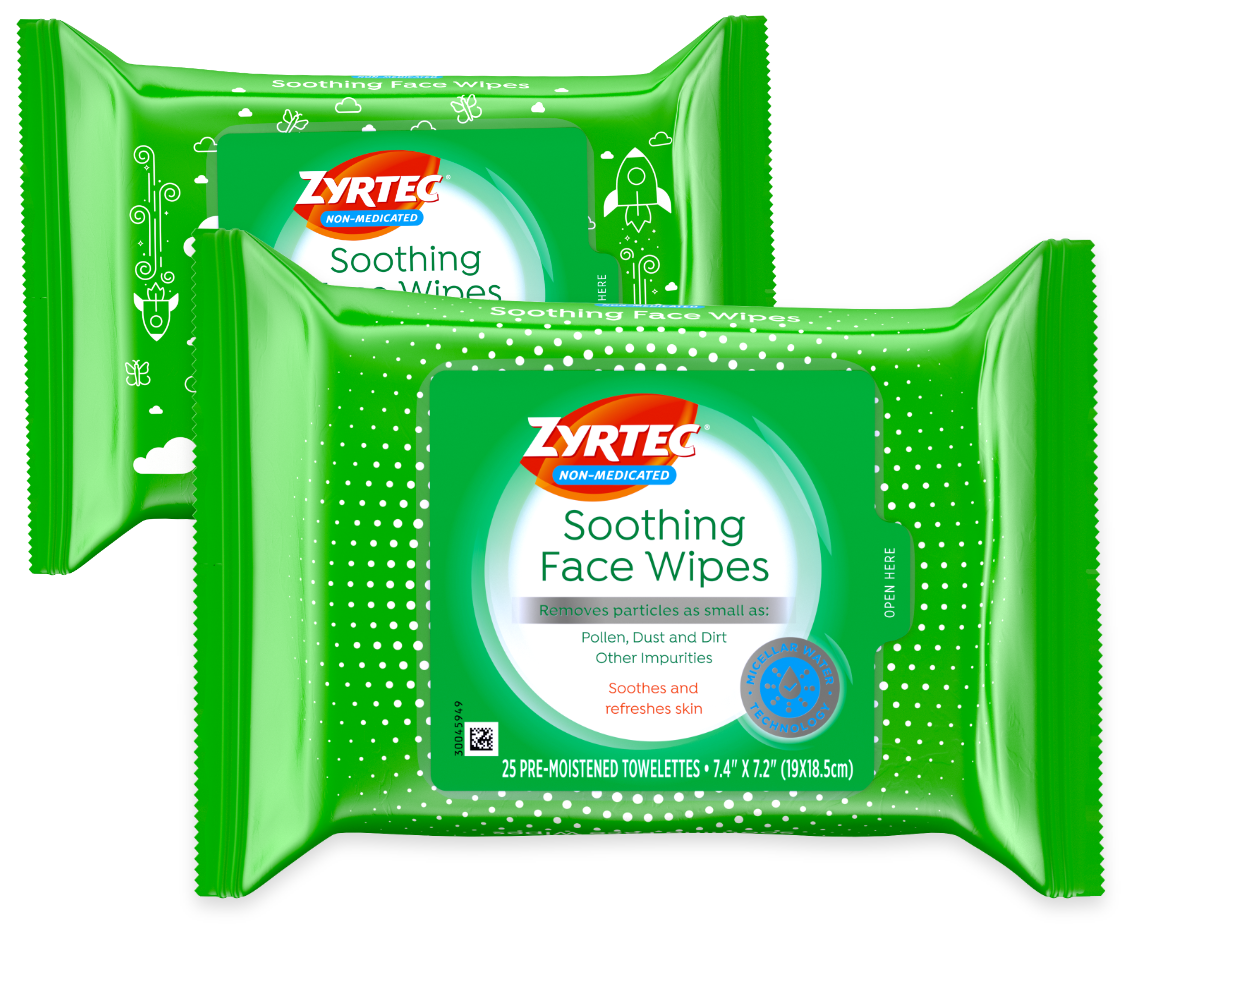 ZYRTEC® Soothing Non-Medicated Face Wipes